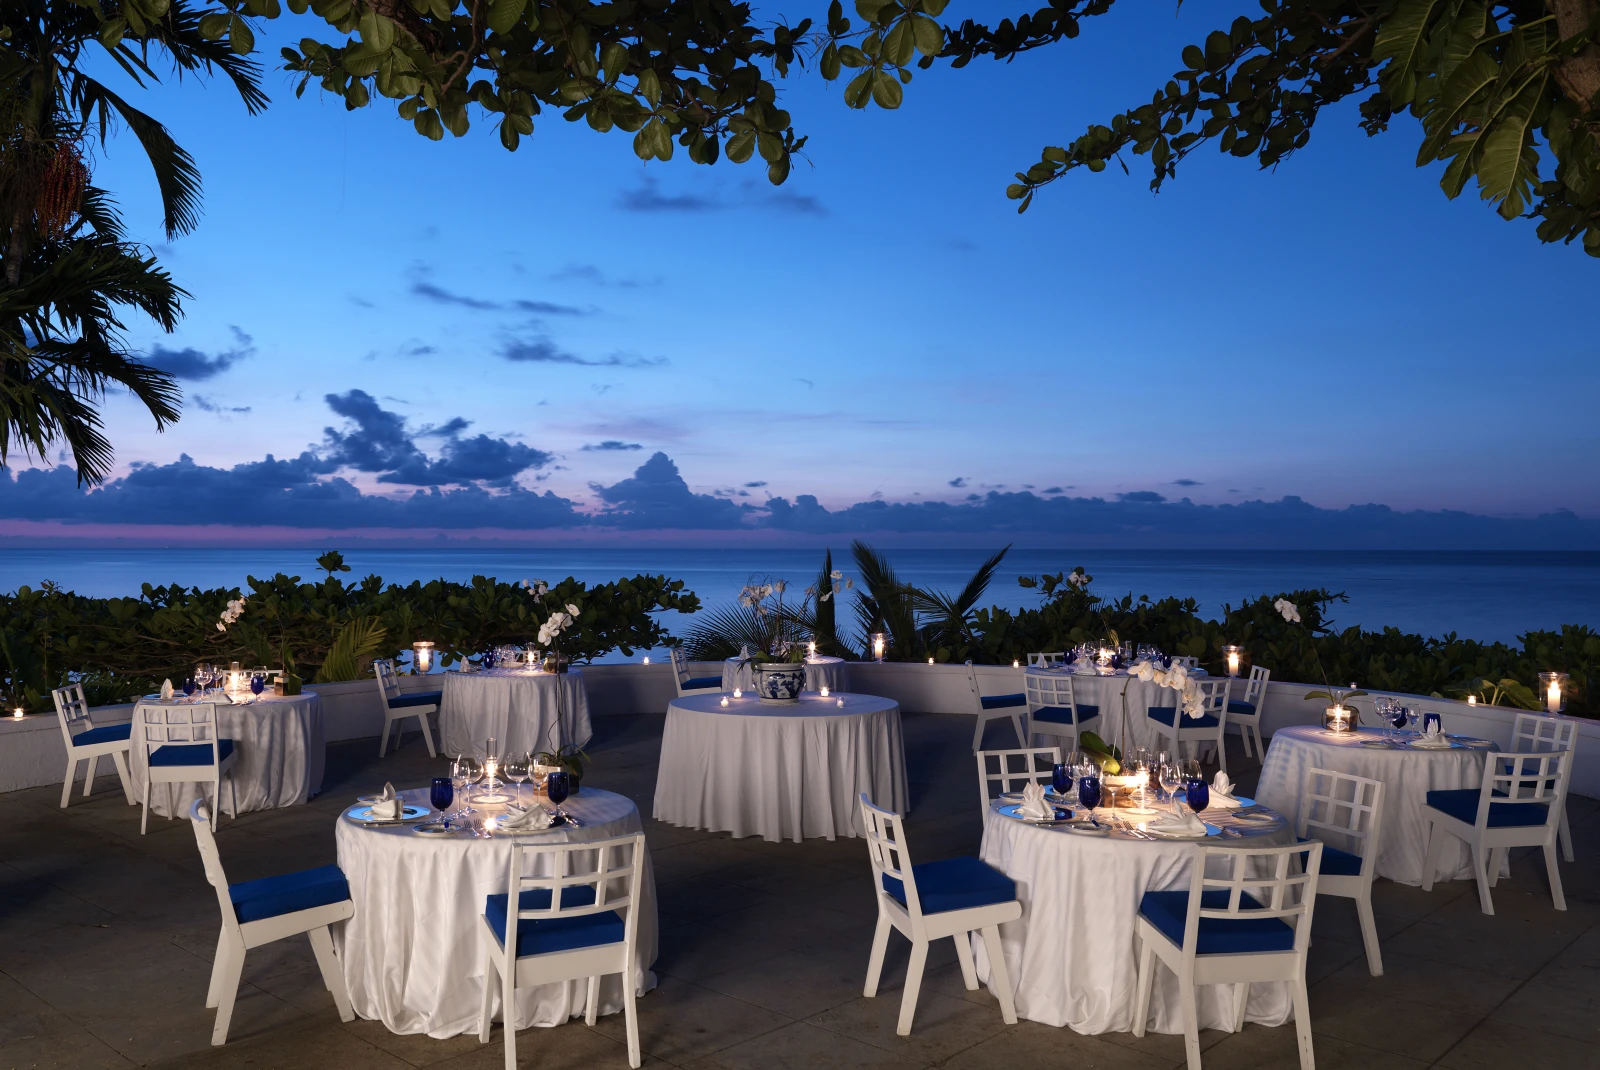 white tables and chairs outside next to body of water during sunset